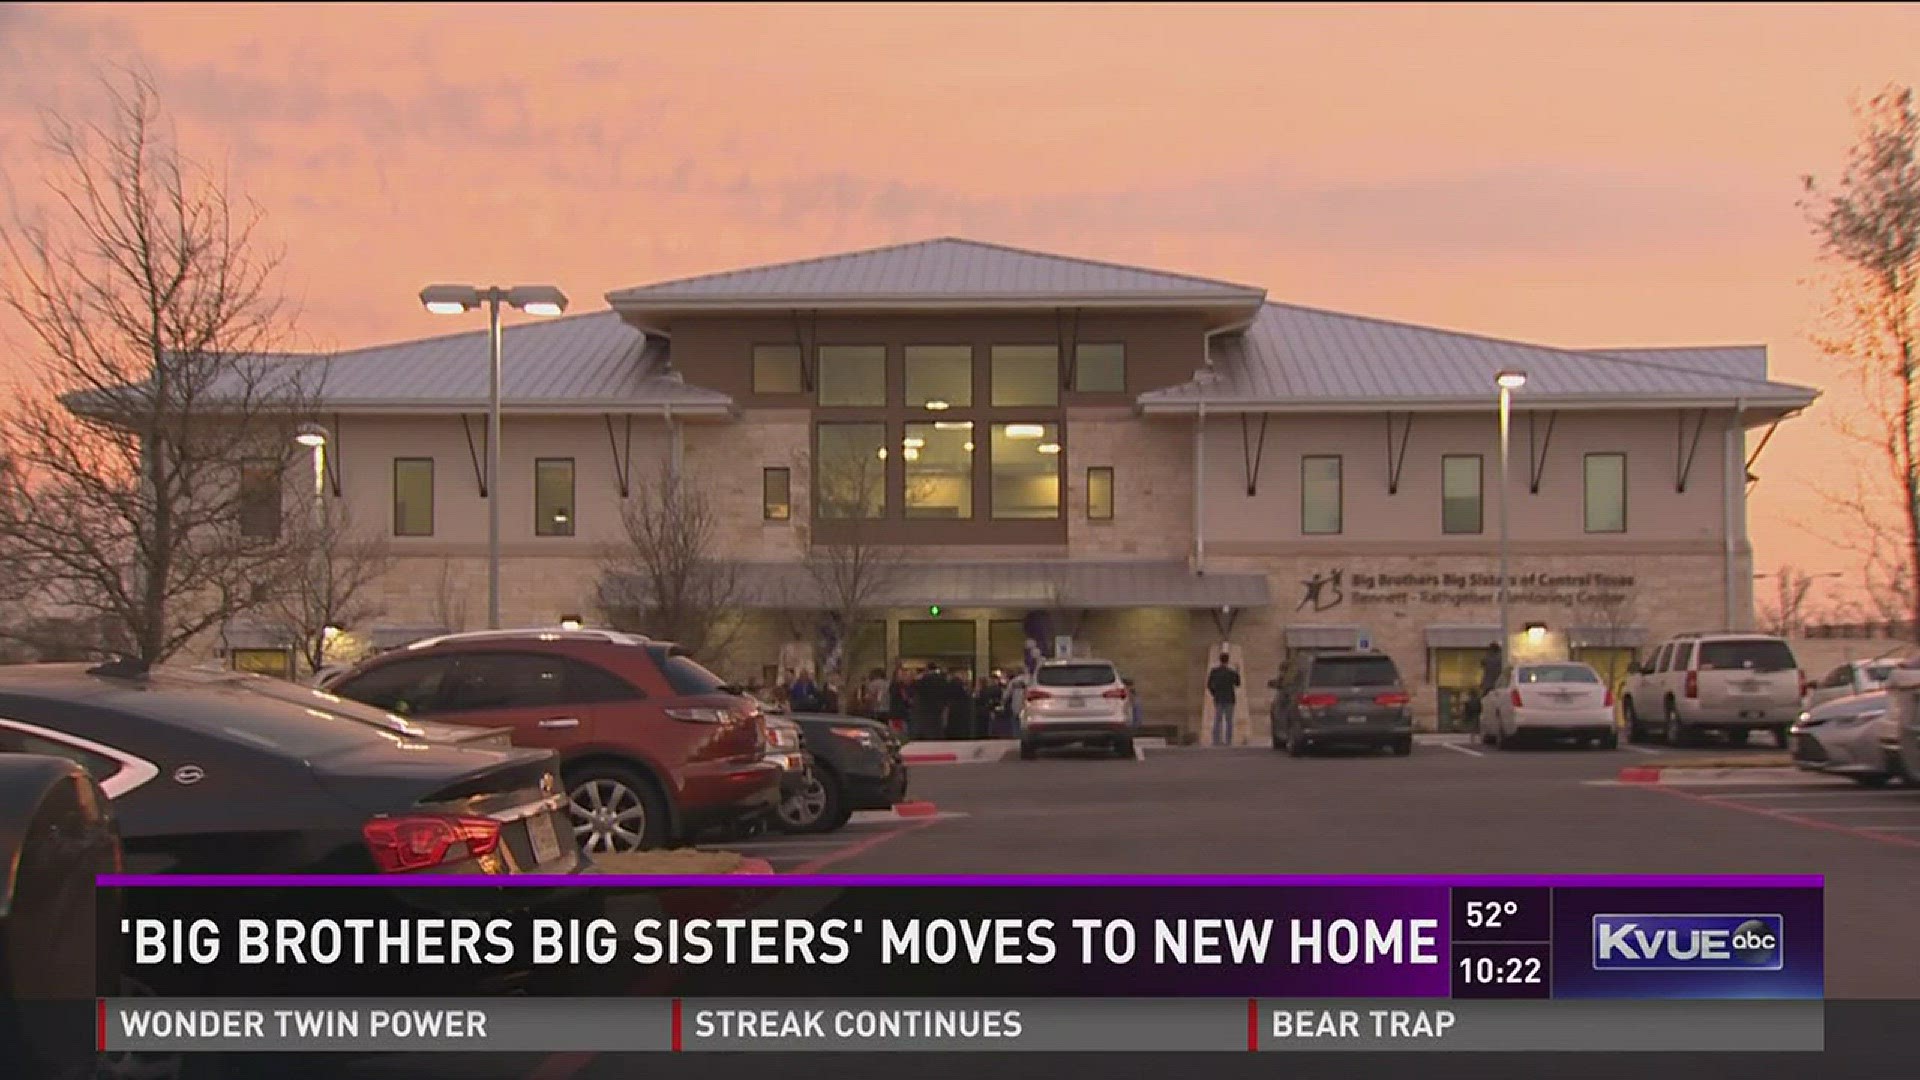 'Big Brothers Big Sisters' moves to new home